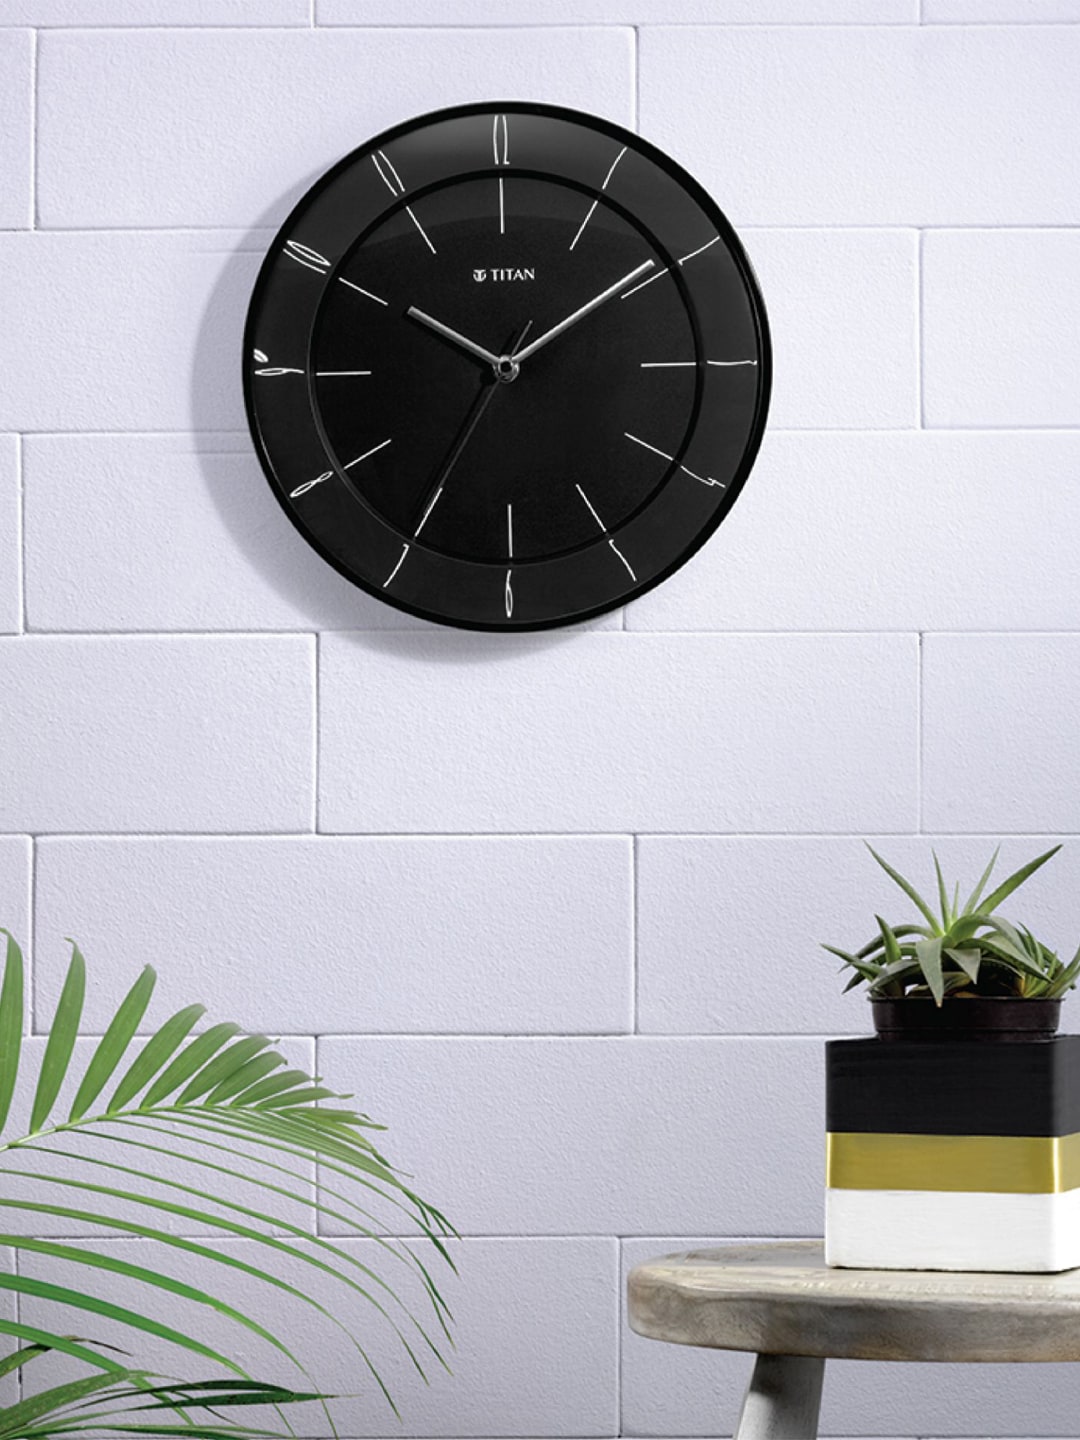 Titan Black Solid Contemporary Analogue Wall Clock Price in India